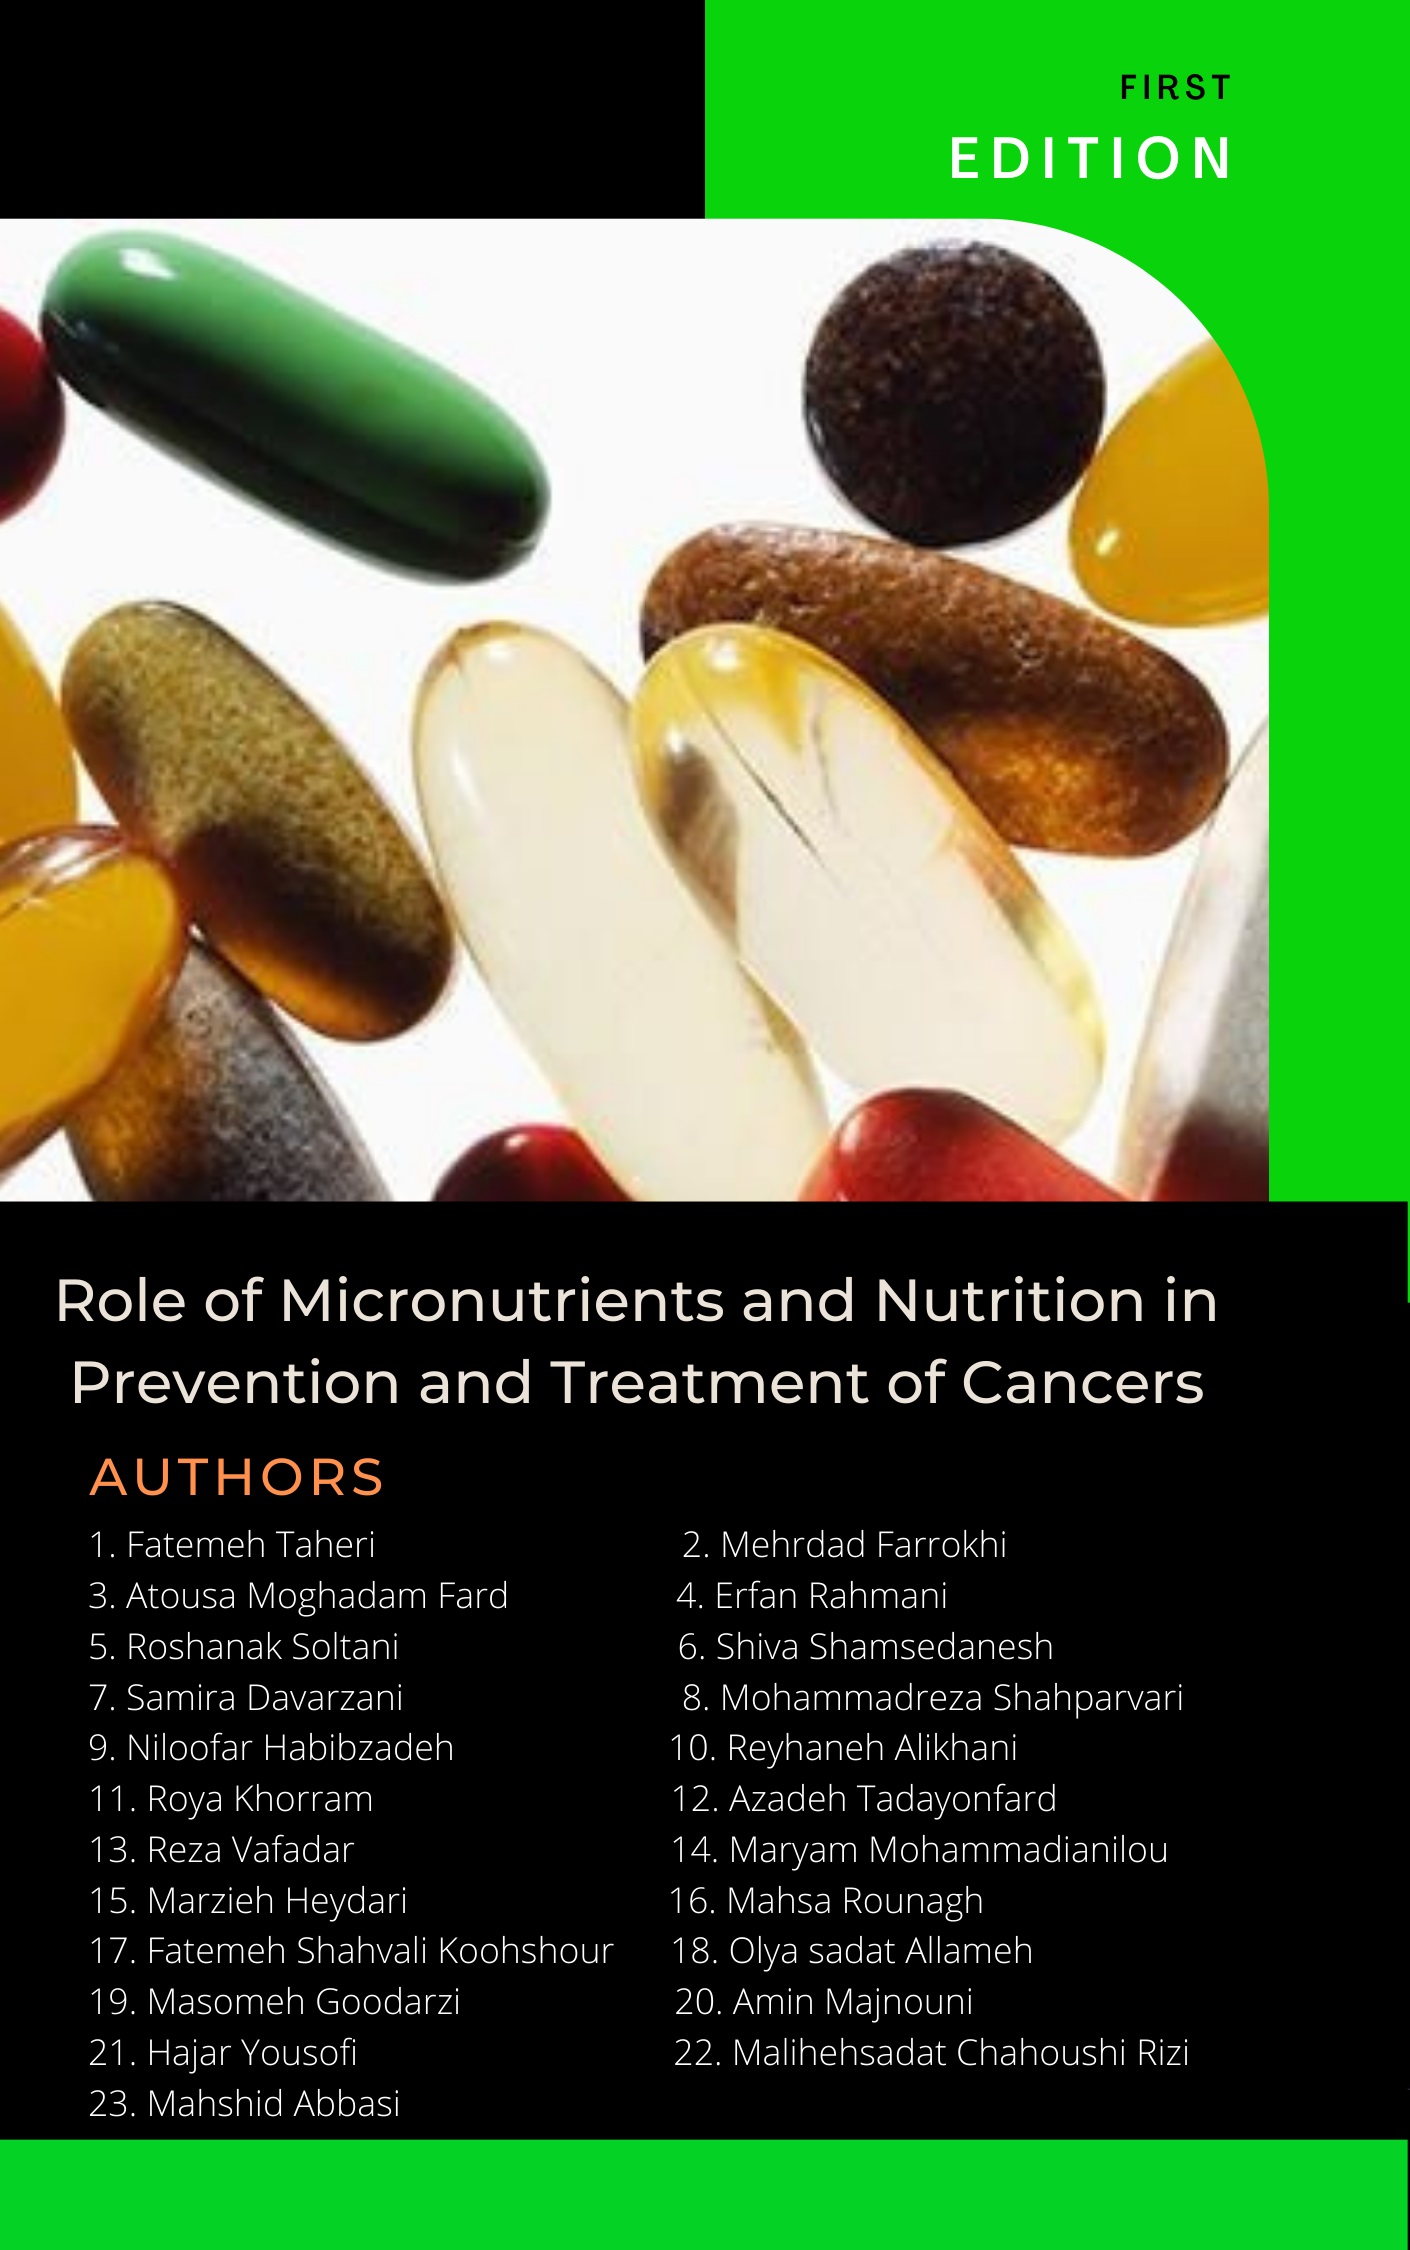 Role of Micronutrients and Nutrition in Prevention and Treatment of Cancers